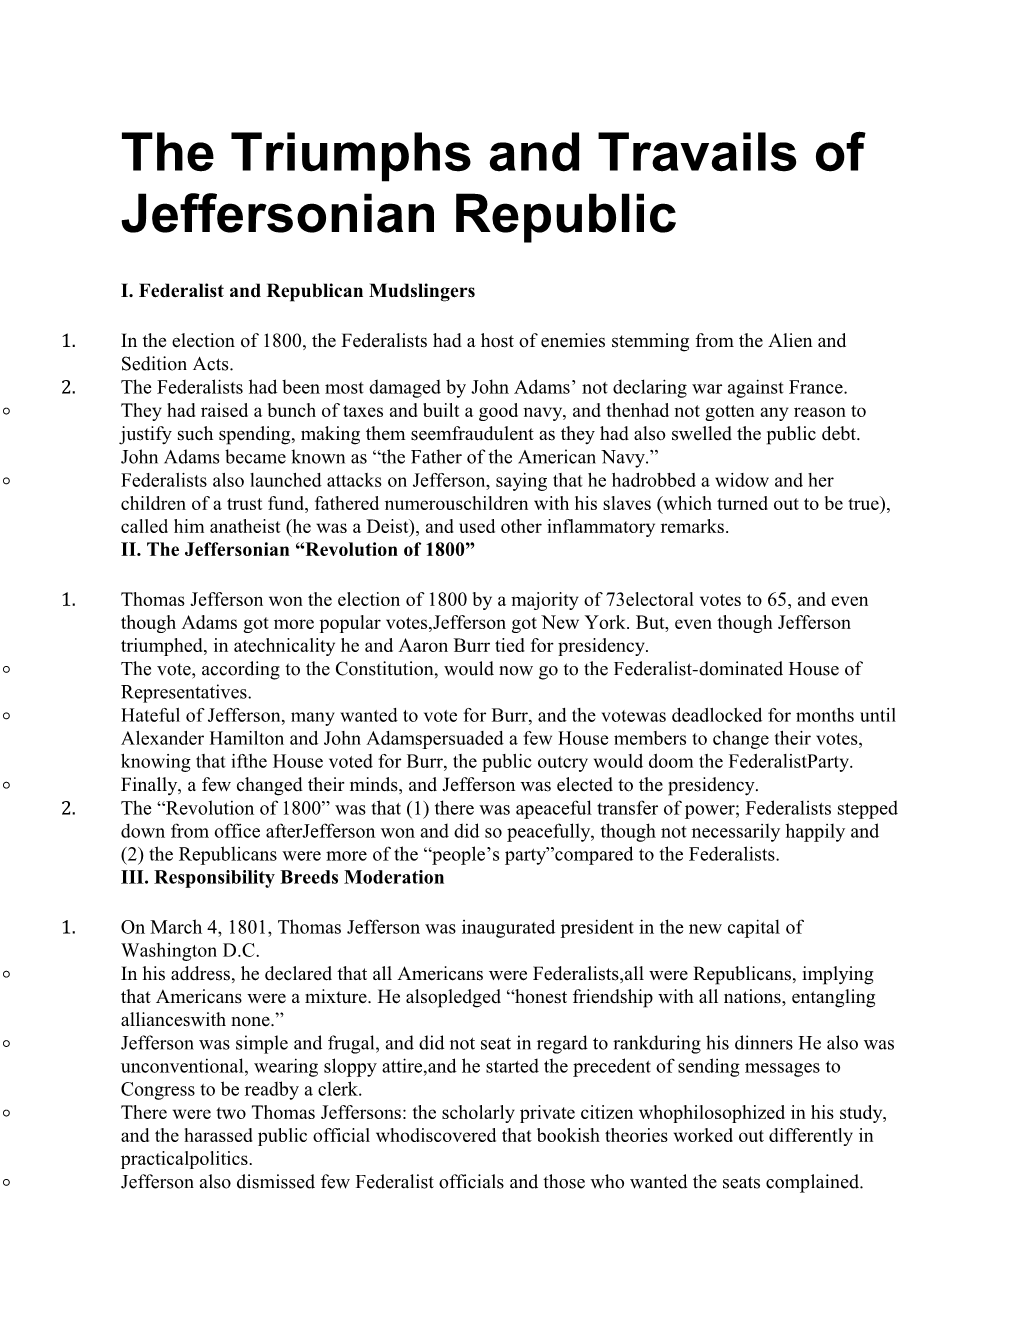 The Triumphs and Travails of Jeffersonian Republic